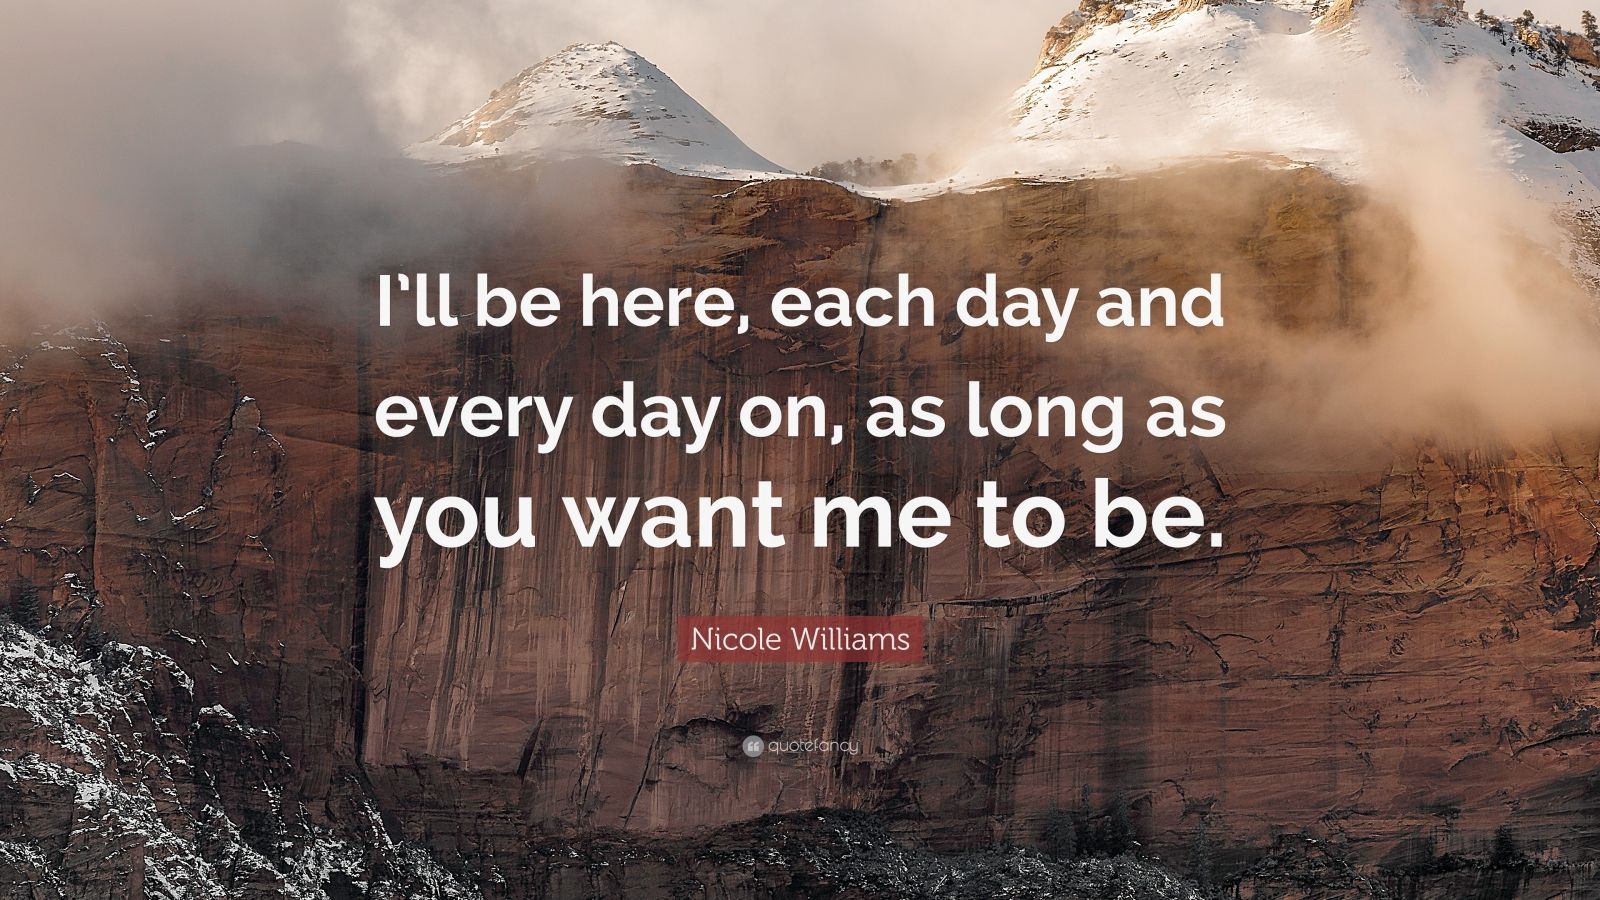 Nicole Williams Quote: “I’ll be here, each day and every day on, as ...